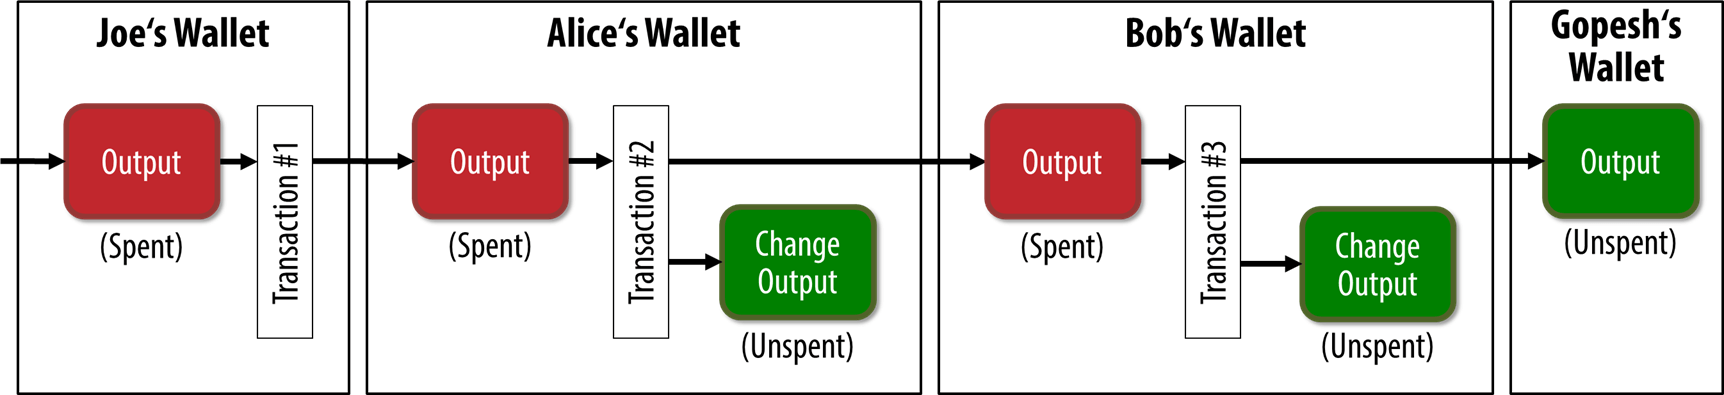 Alice’s transaction as part of a transaction chain